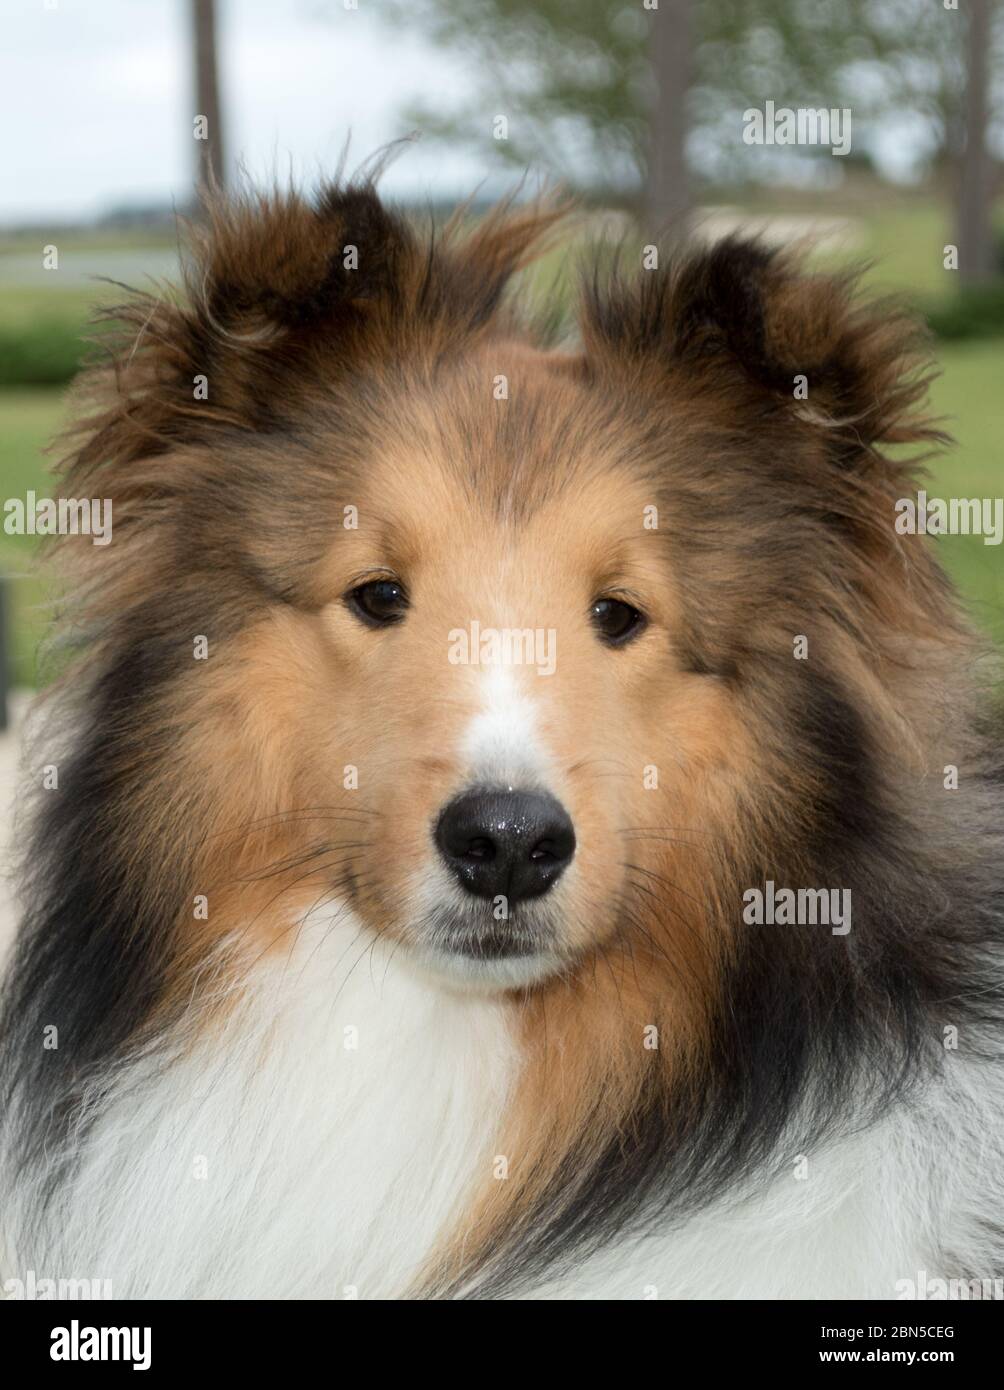 Close up of the friendly face of a young adult Shetland Sheepdog, a breed of herding dog often referred to as a sheltie or collie Stock Photo